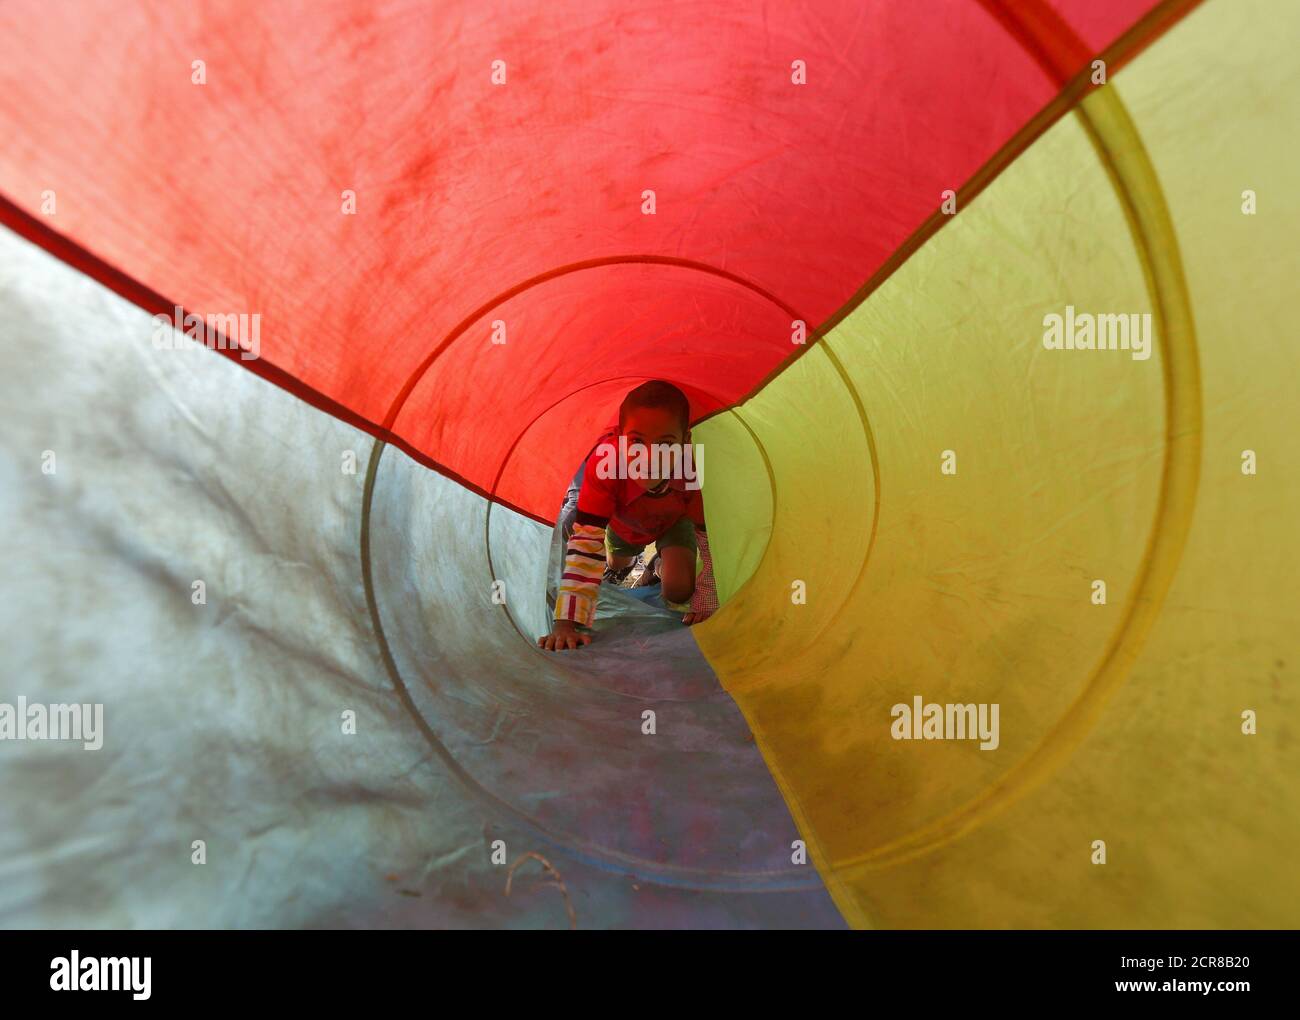 A boy looks on as he crawls through a play tunnel during a rugby training session at a public park in Kolkata, India, December 28, 2015. REUTERS/Rupak De Chowdhuri Stock Photo